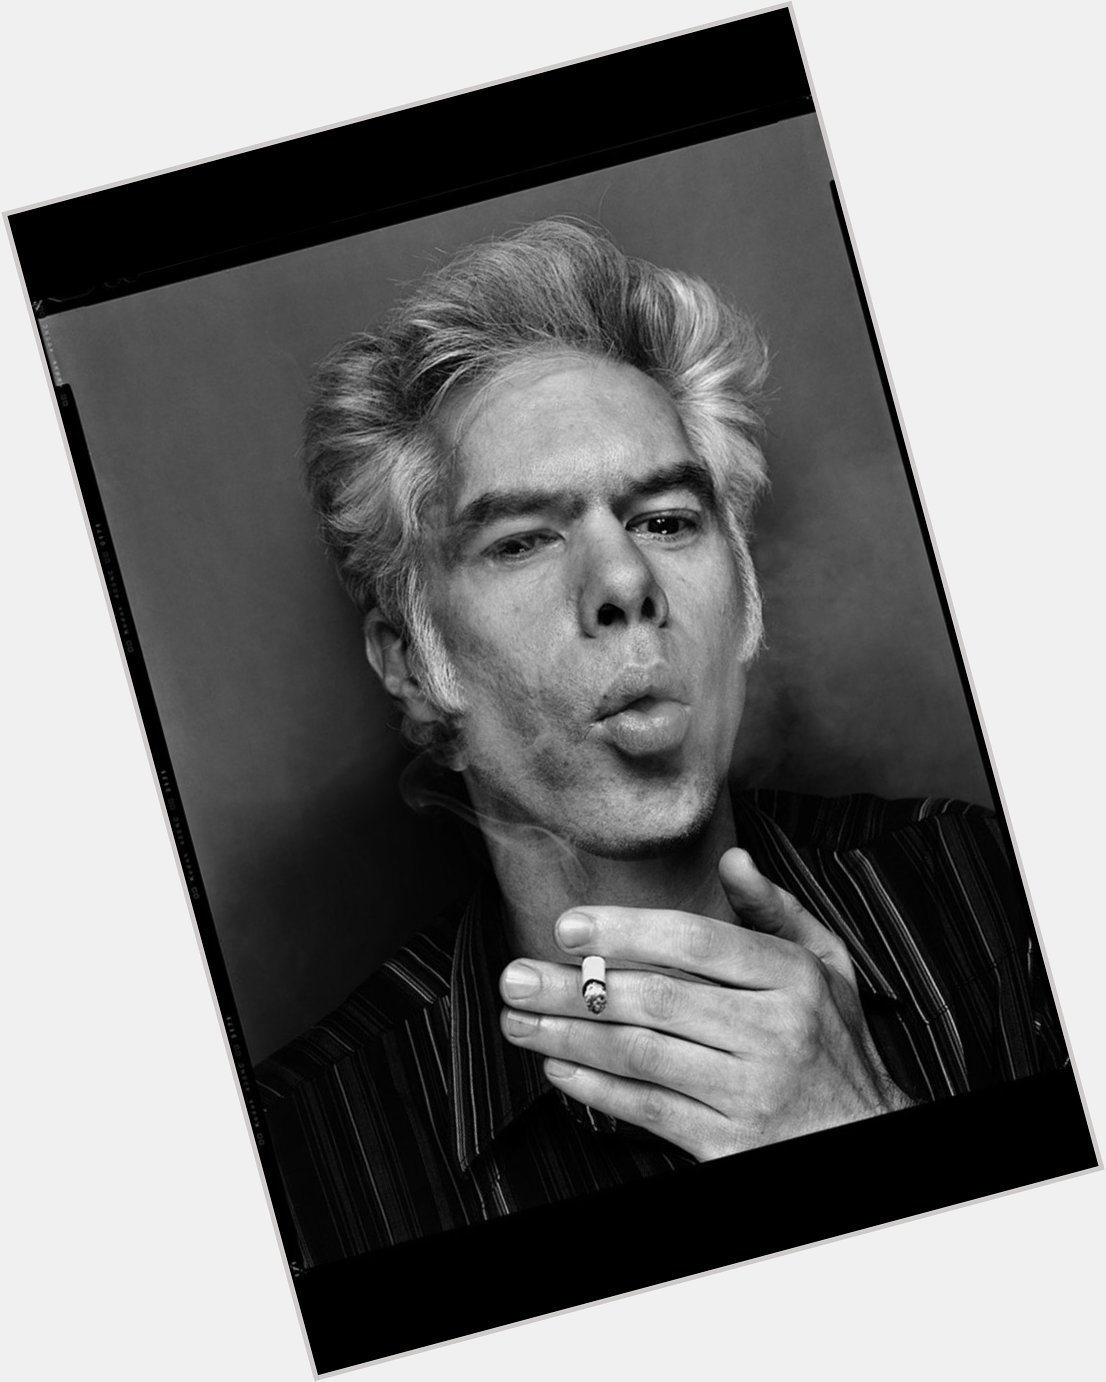 Happy Birthday to one of the coolest directors alive, Jim Jarmusch! Second to only David Lynch for best hair. 